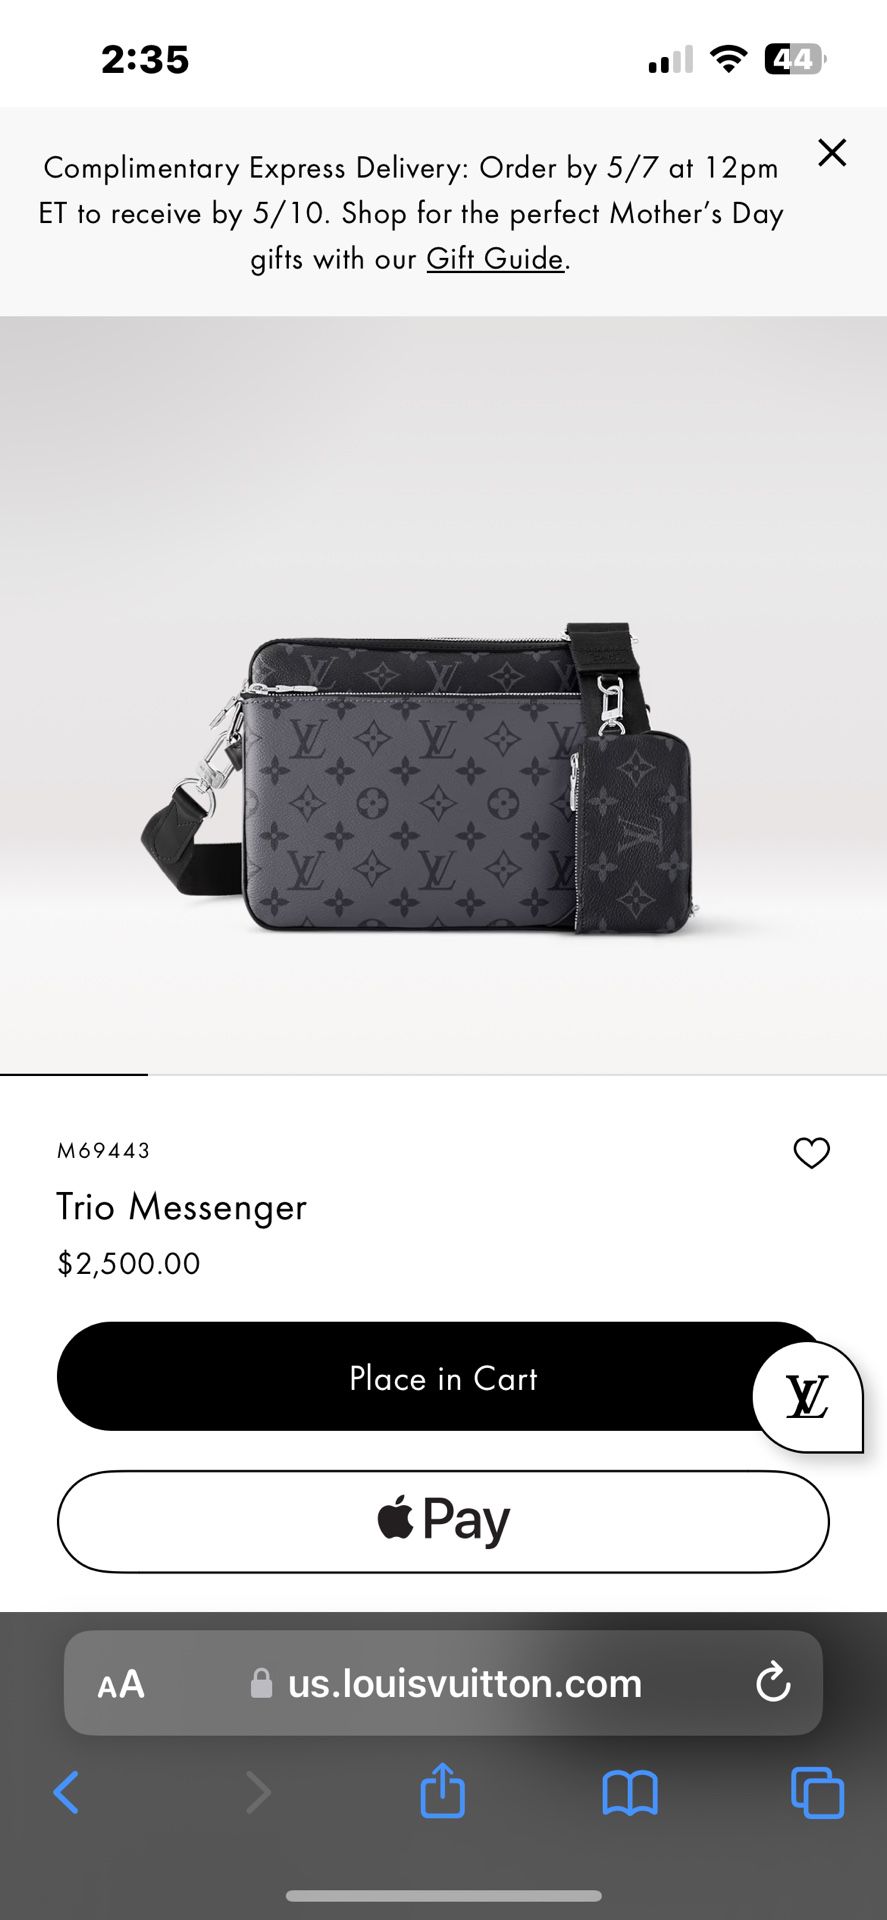 throw Me Offers For This Bag